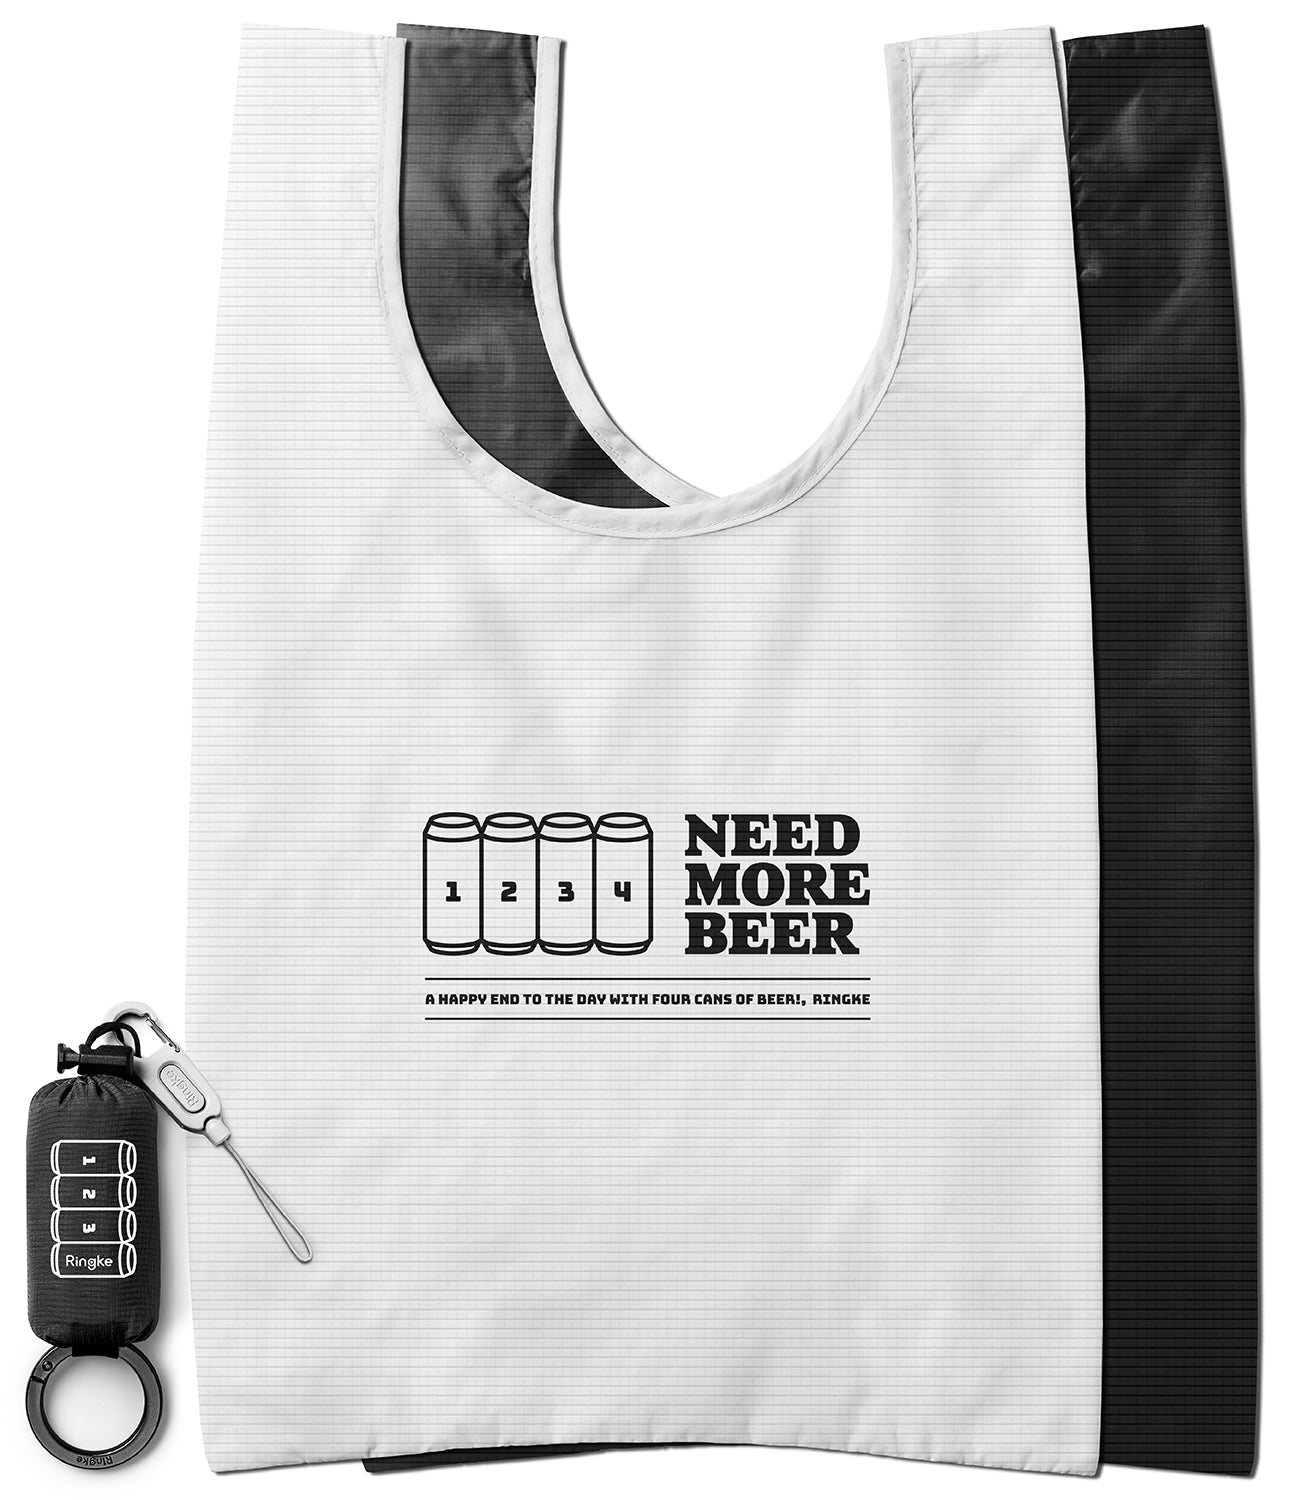 Day-Me Bag | Need More Beer